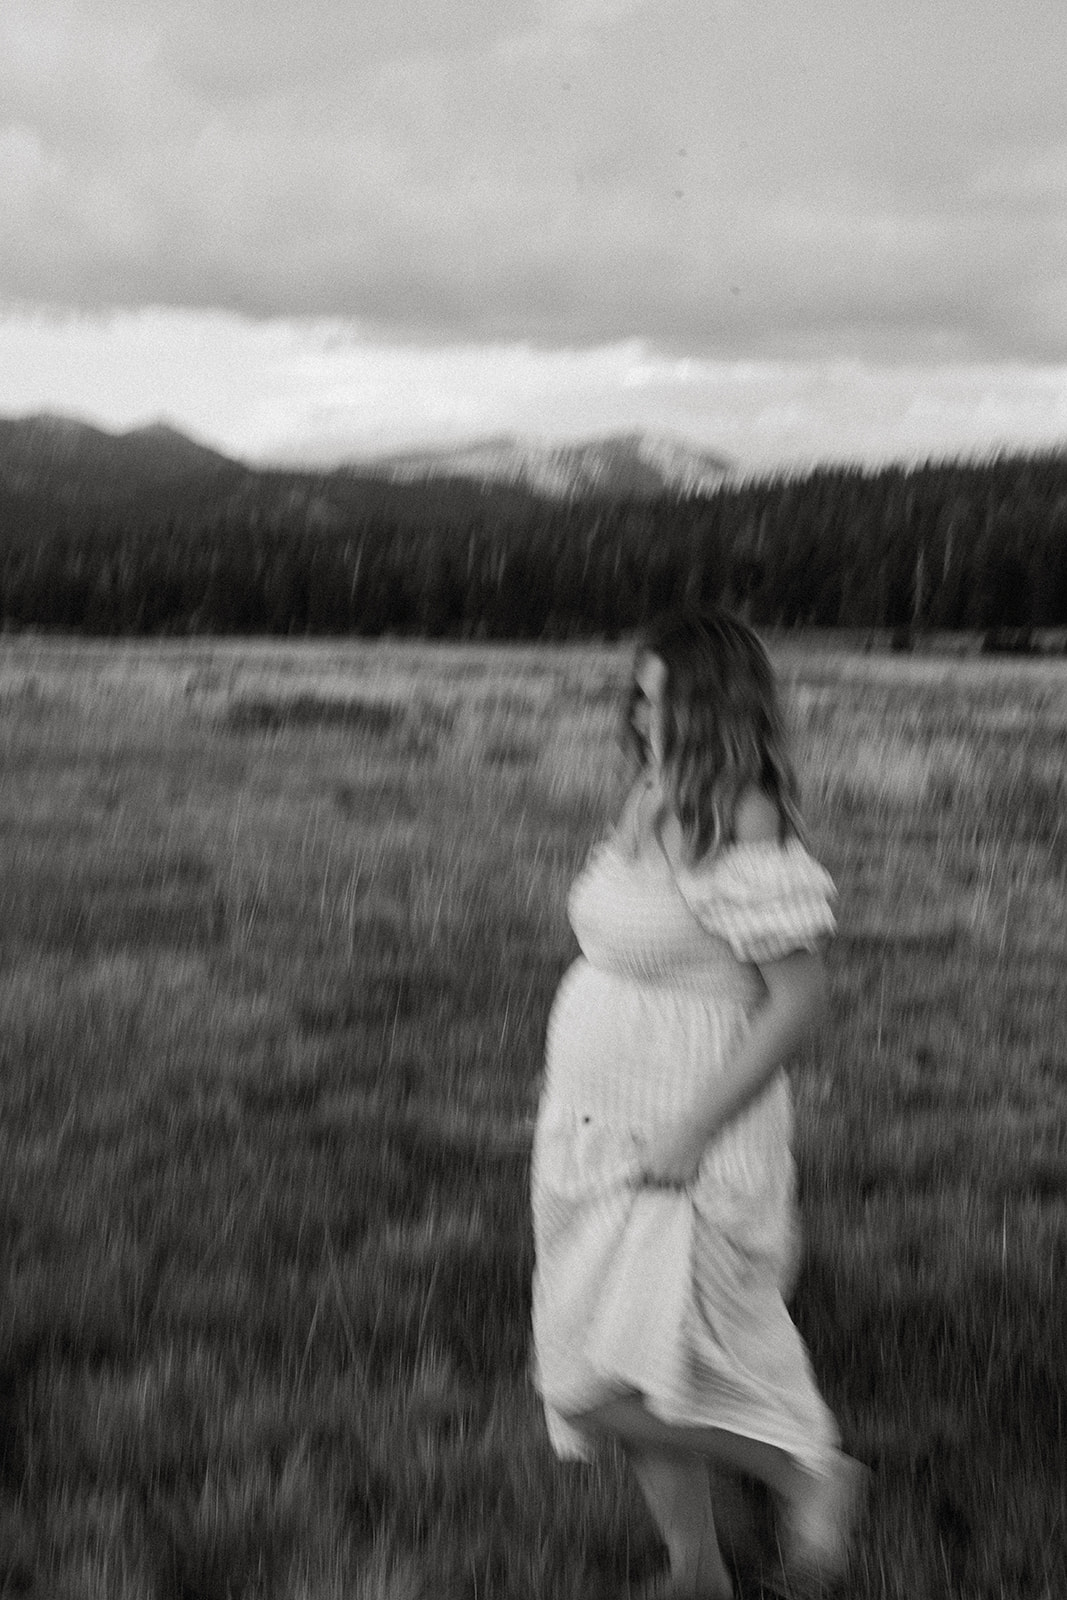 a mom holding flowers in a black and white whimsical artistic blurred maternity photos taken in hope valley california.